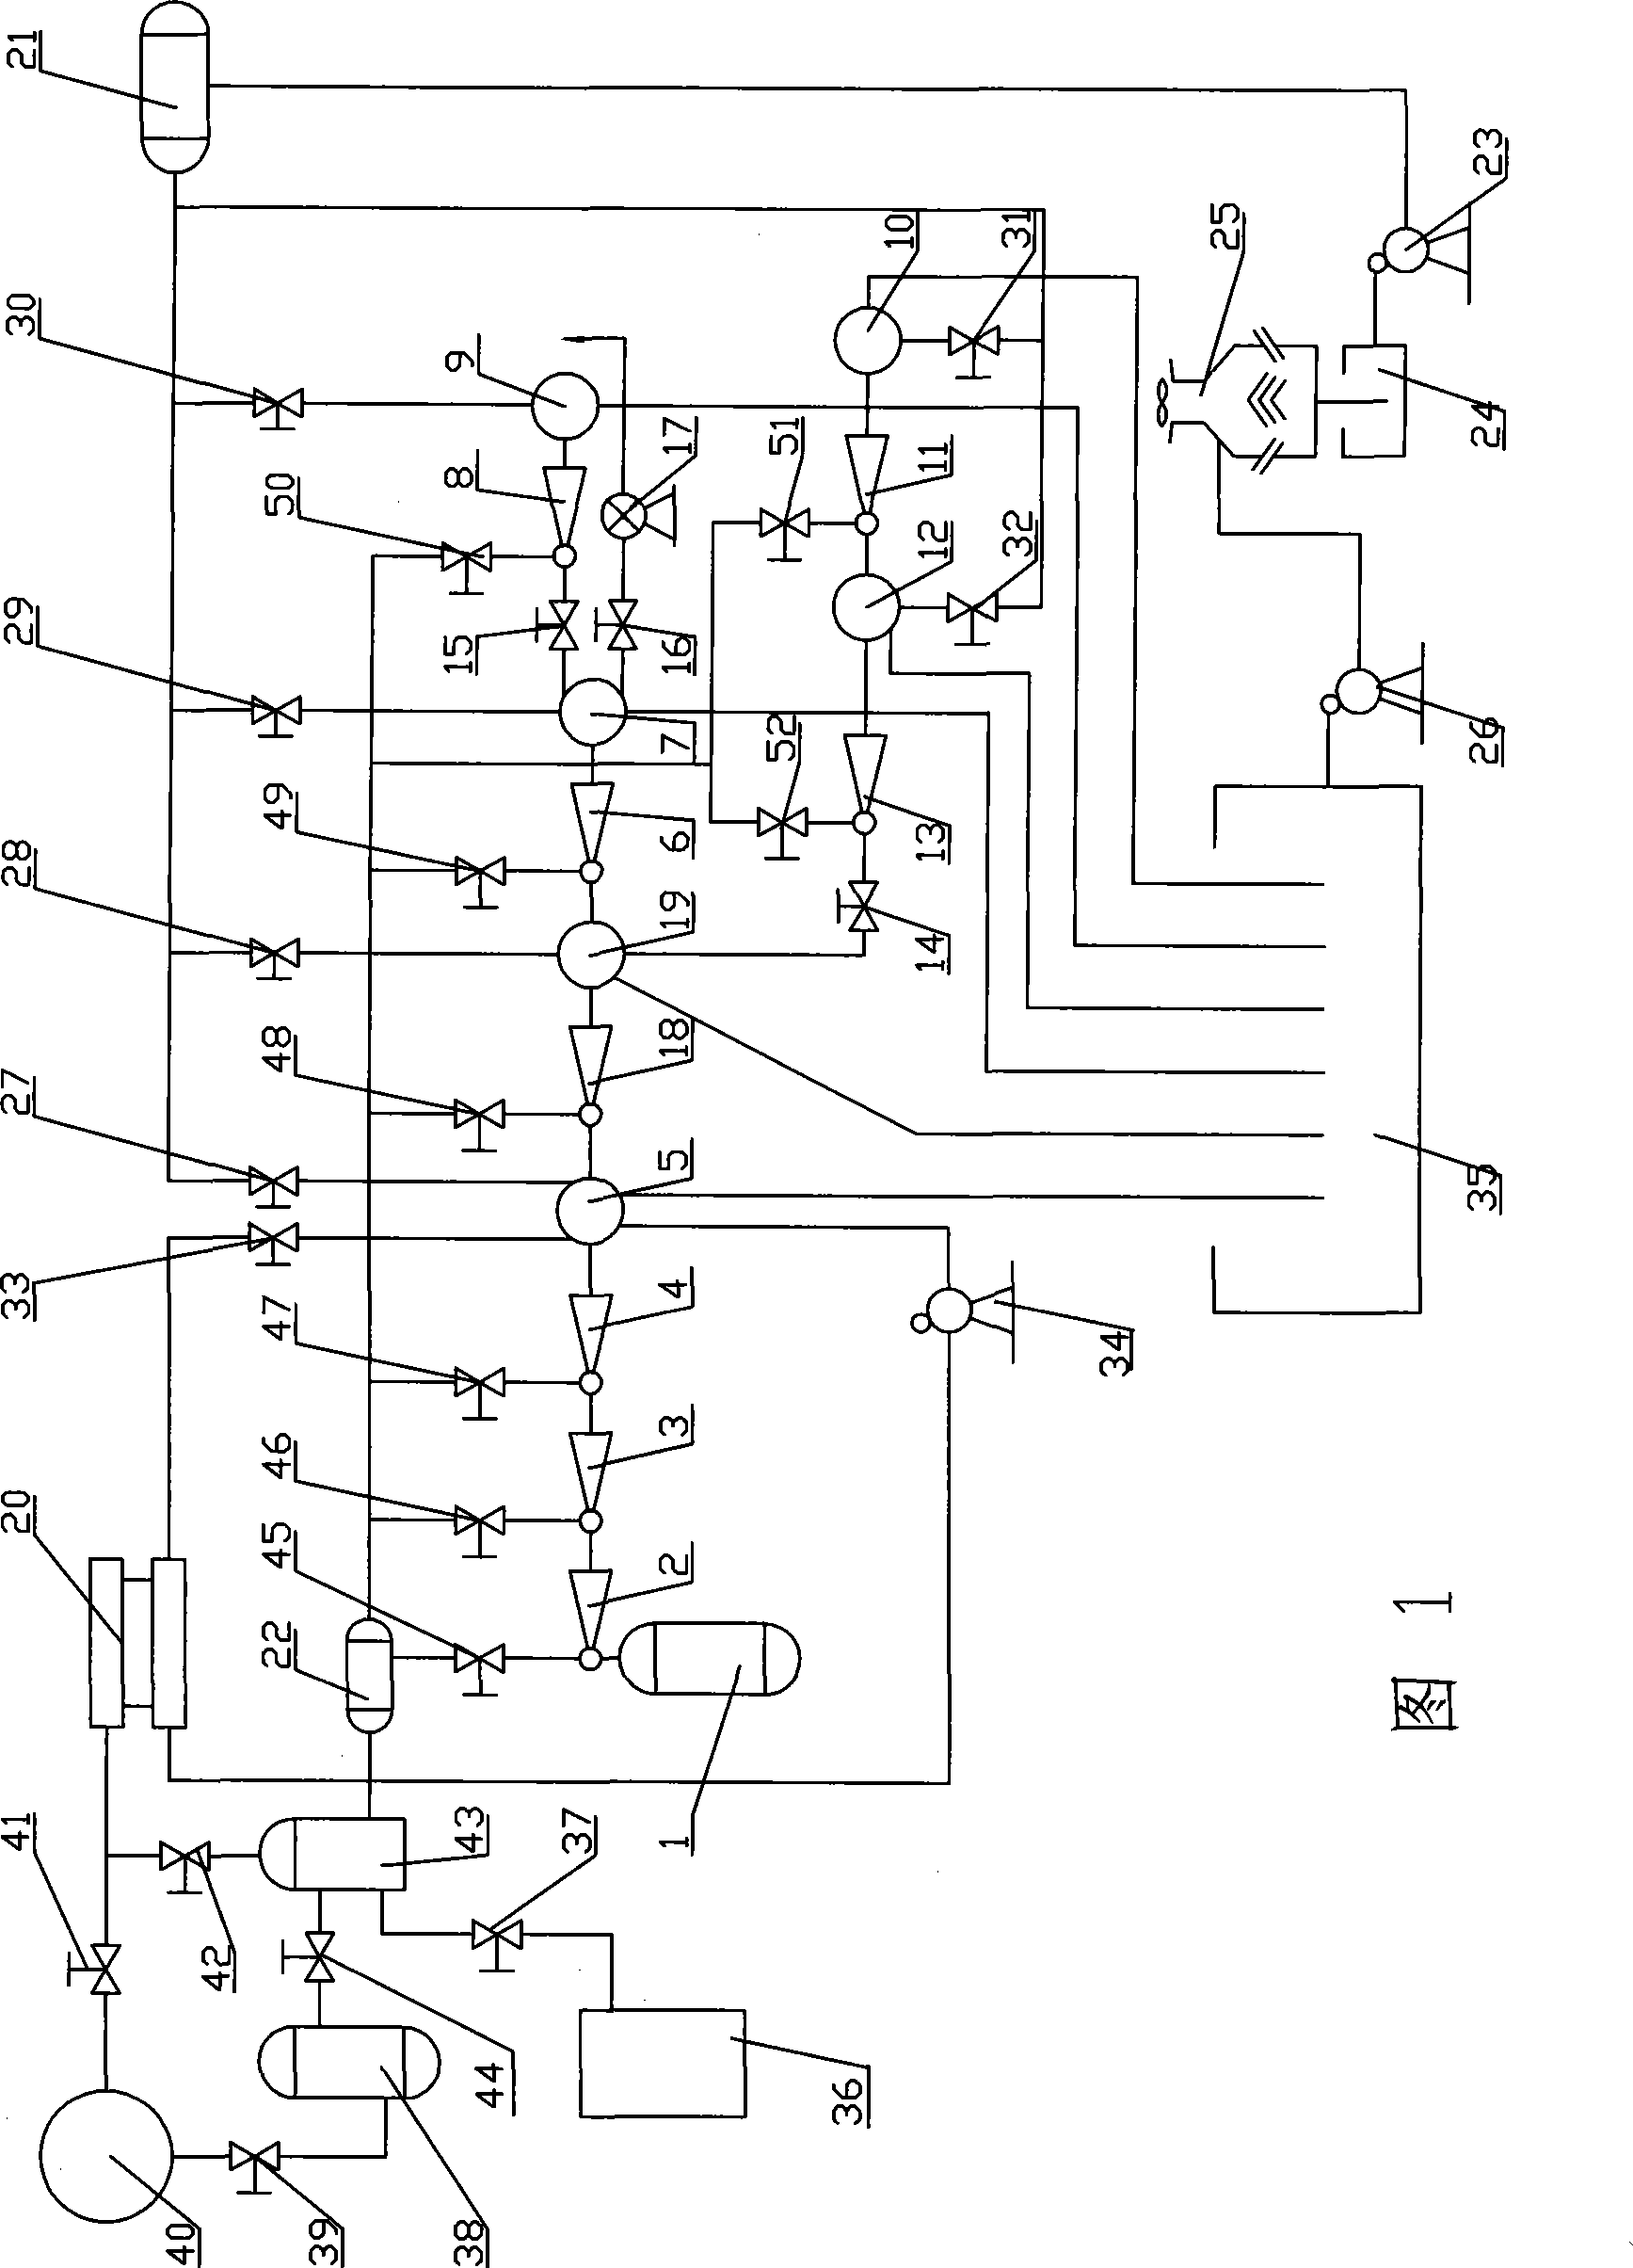 Combined steam jet vacuum pump system capable of utilizing exhaust heat